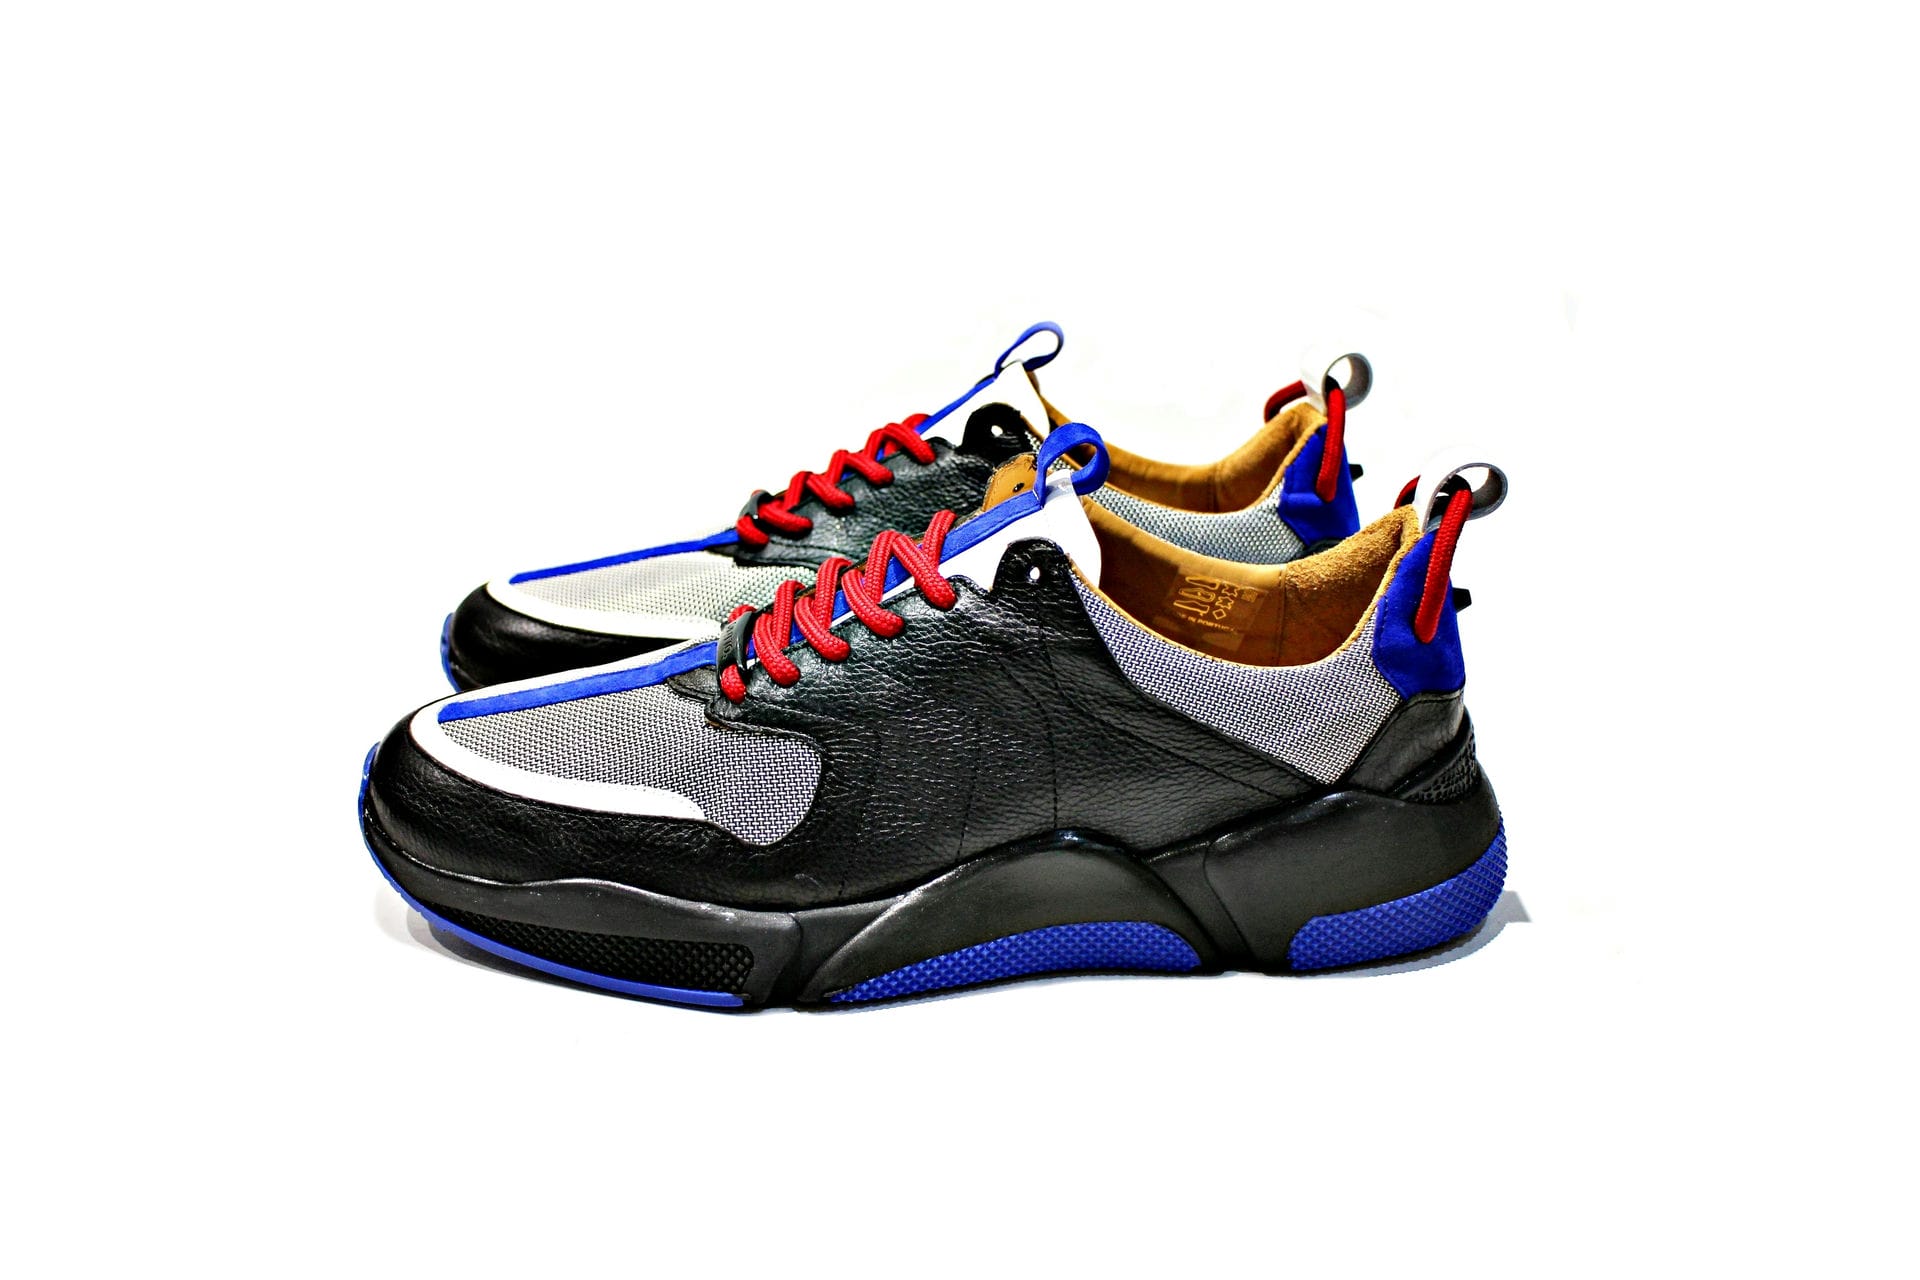 Sneaker composed of leather and metallic fabric, suede, rubber sole, leather lining.